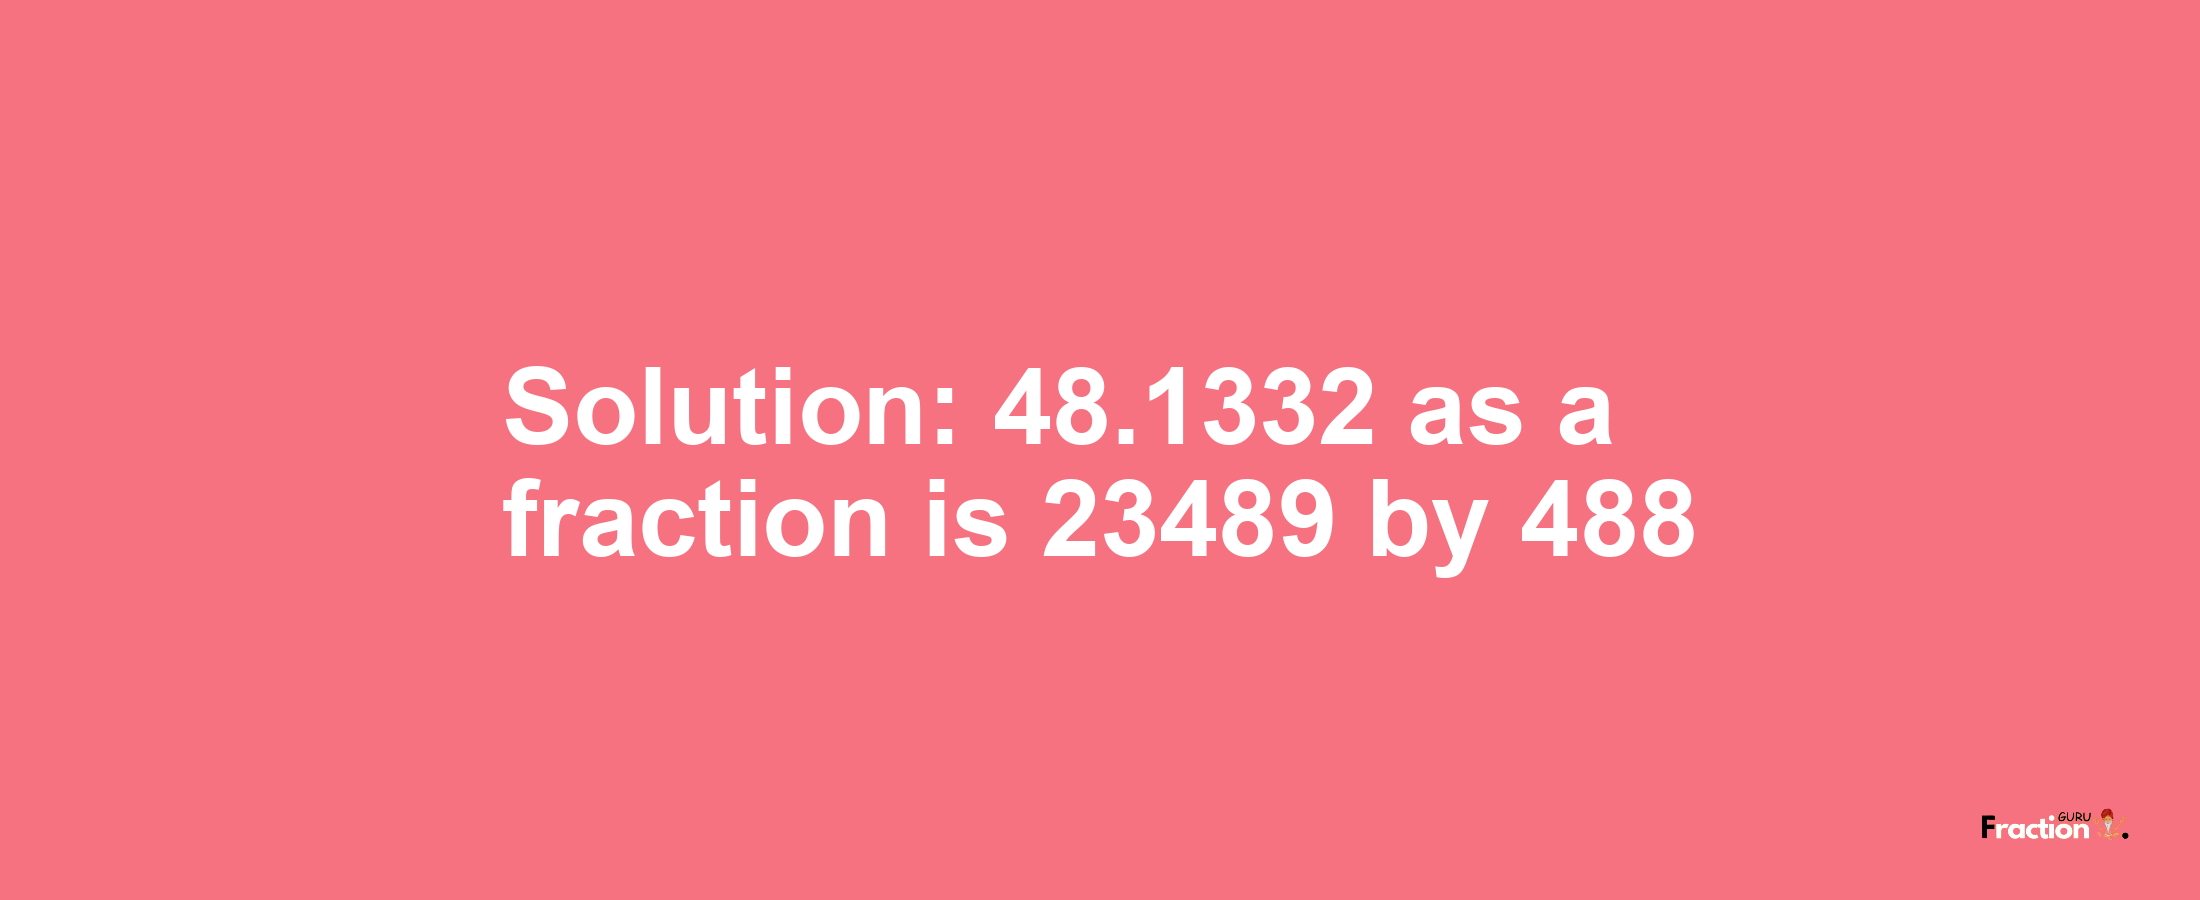 Solution:48.1332 as a fraction is 23489/488